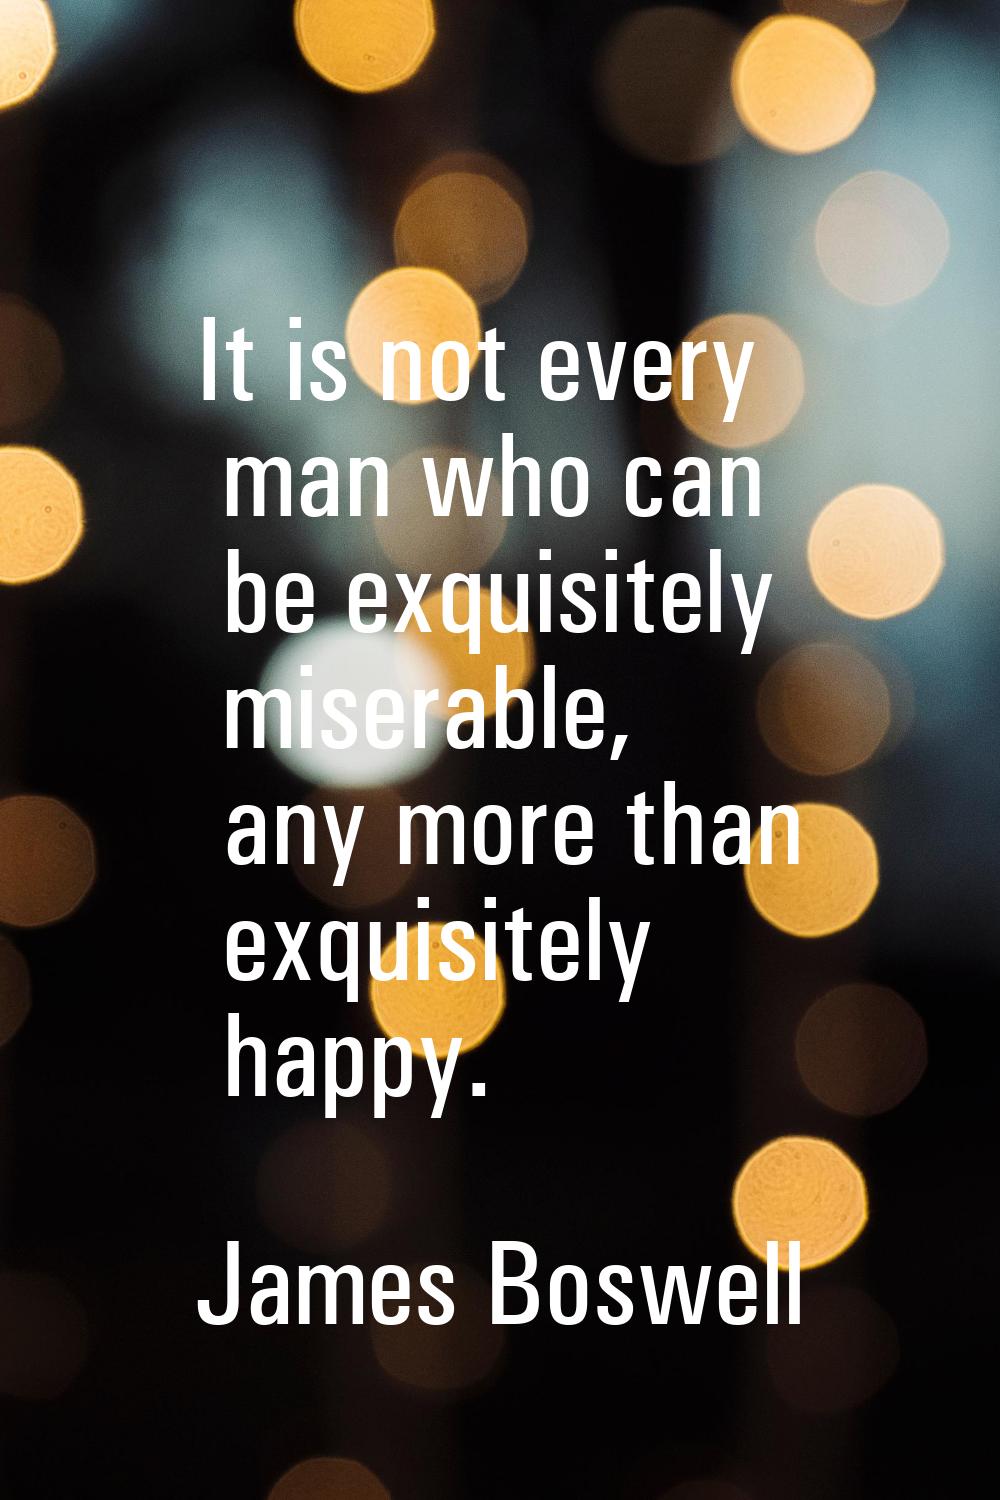 It is not every man who can be exquisitely miserable, any more than exquisitely happy.